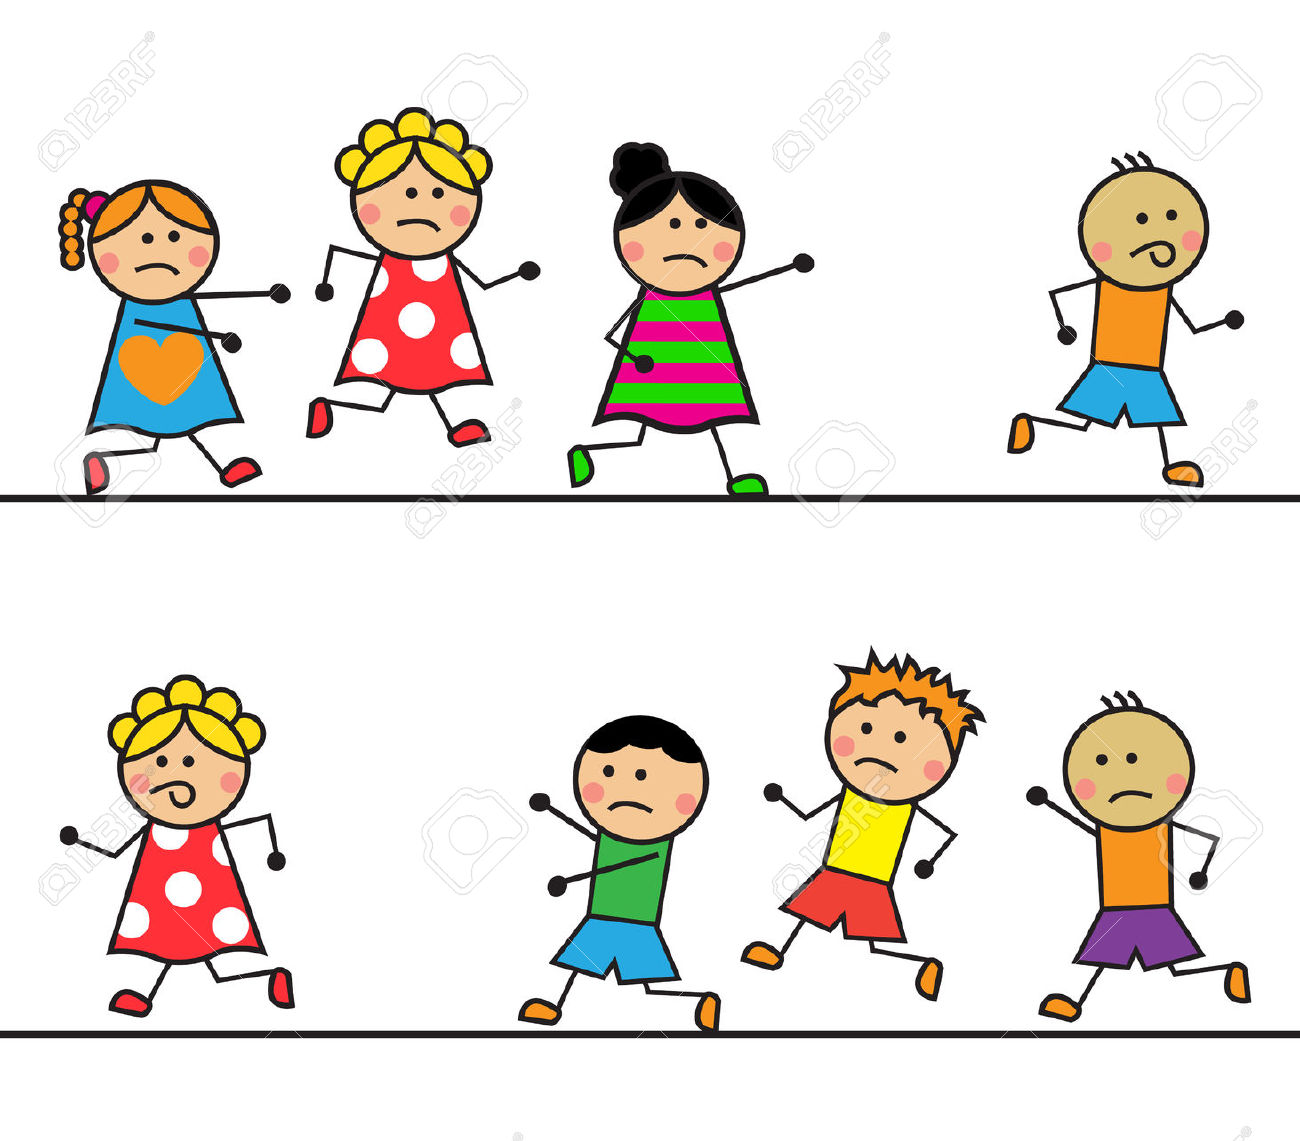 boy and girl running clipart - photo #49